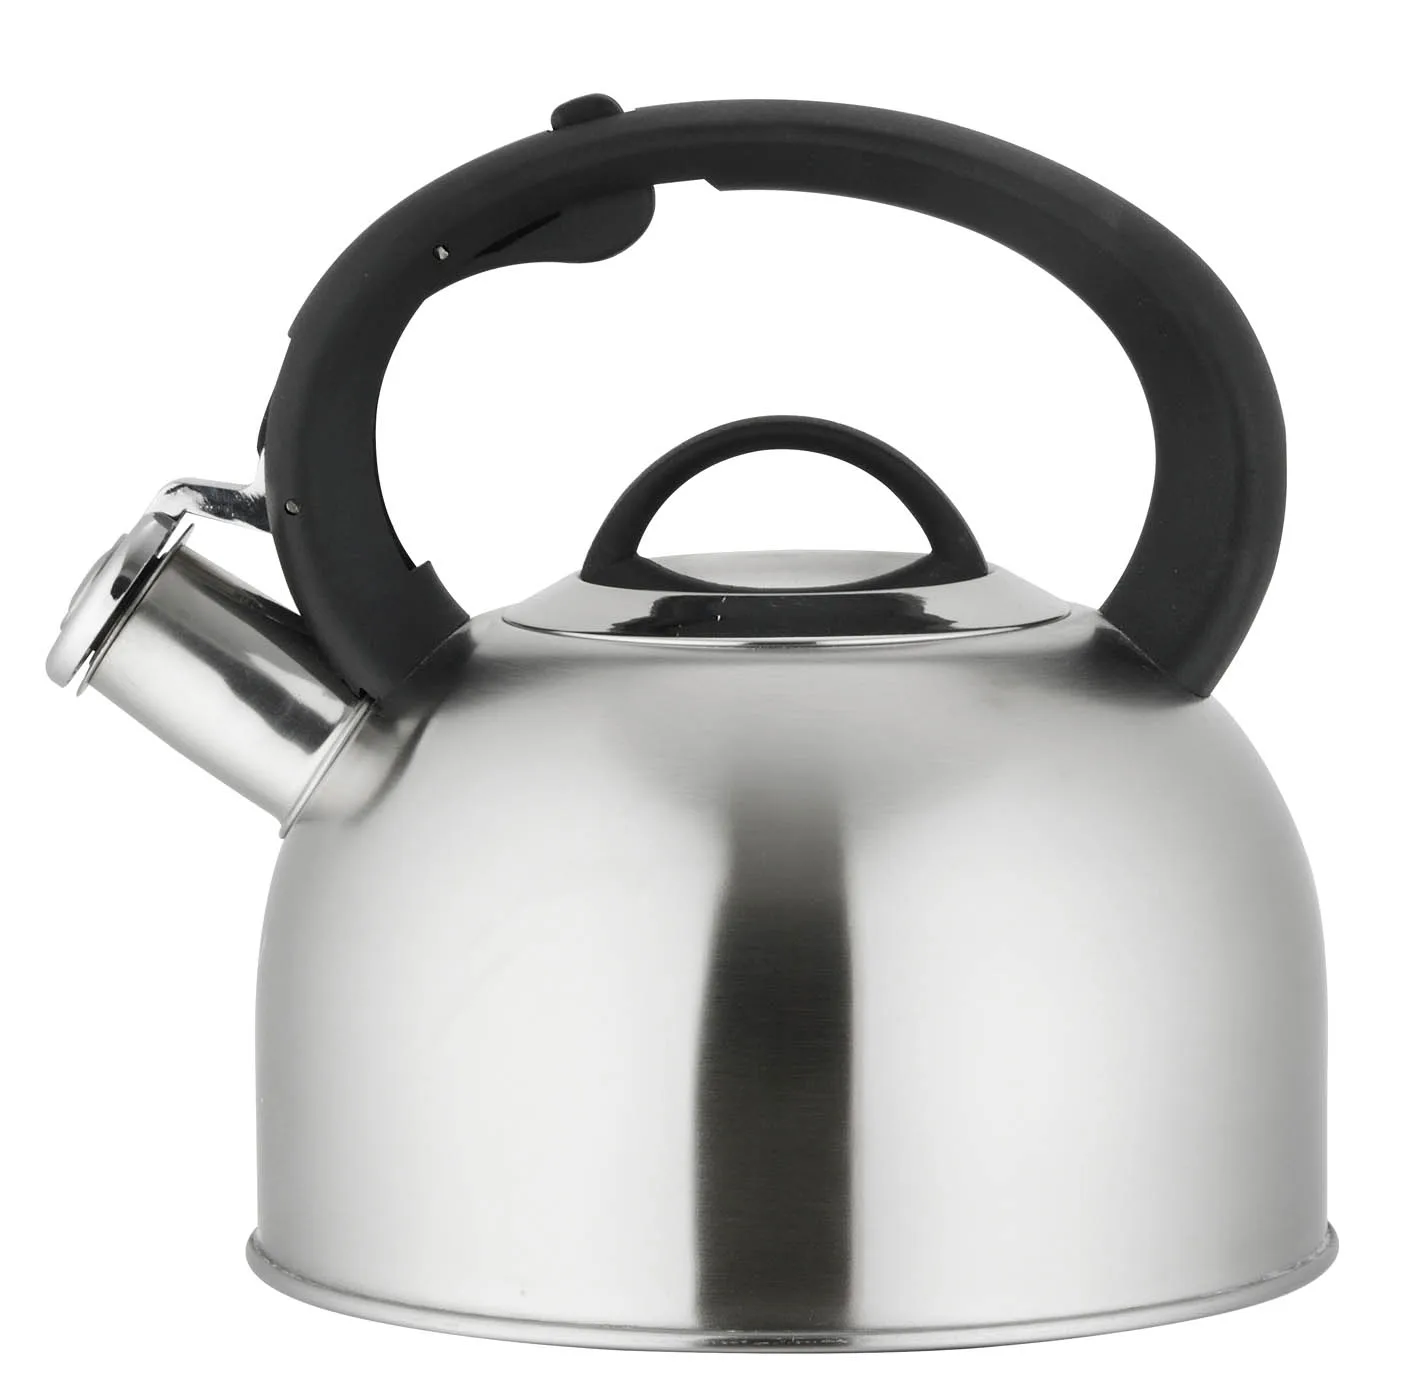 

New Design 304 Stainless Steel Safety Lid Kettle Spout Cooking Water Tea Whistling Kettles